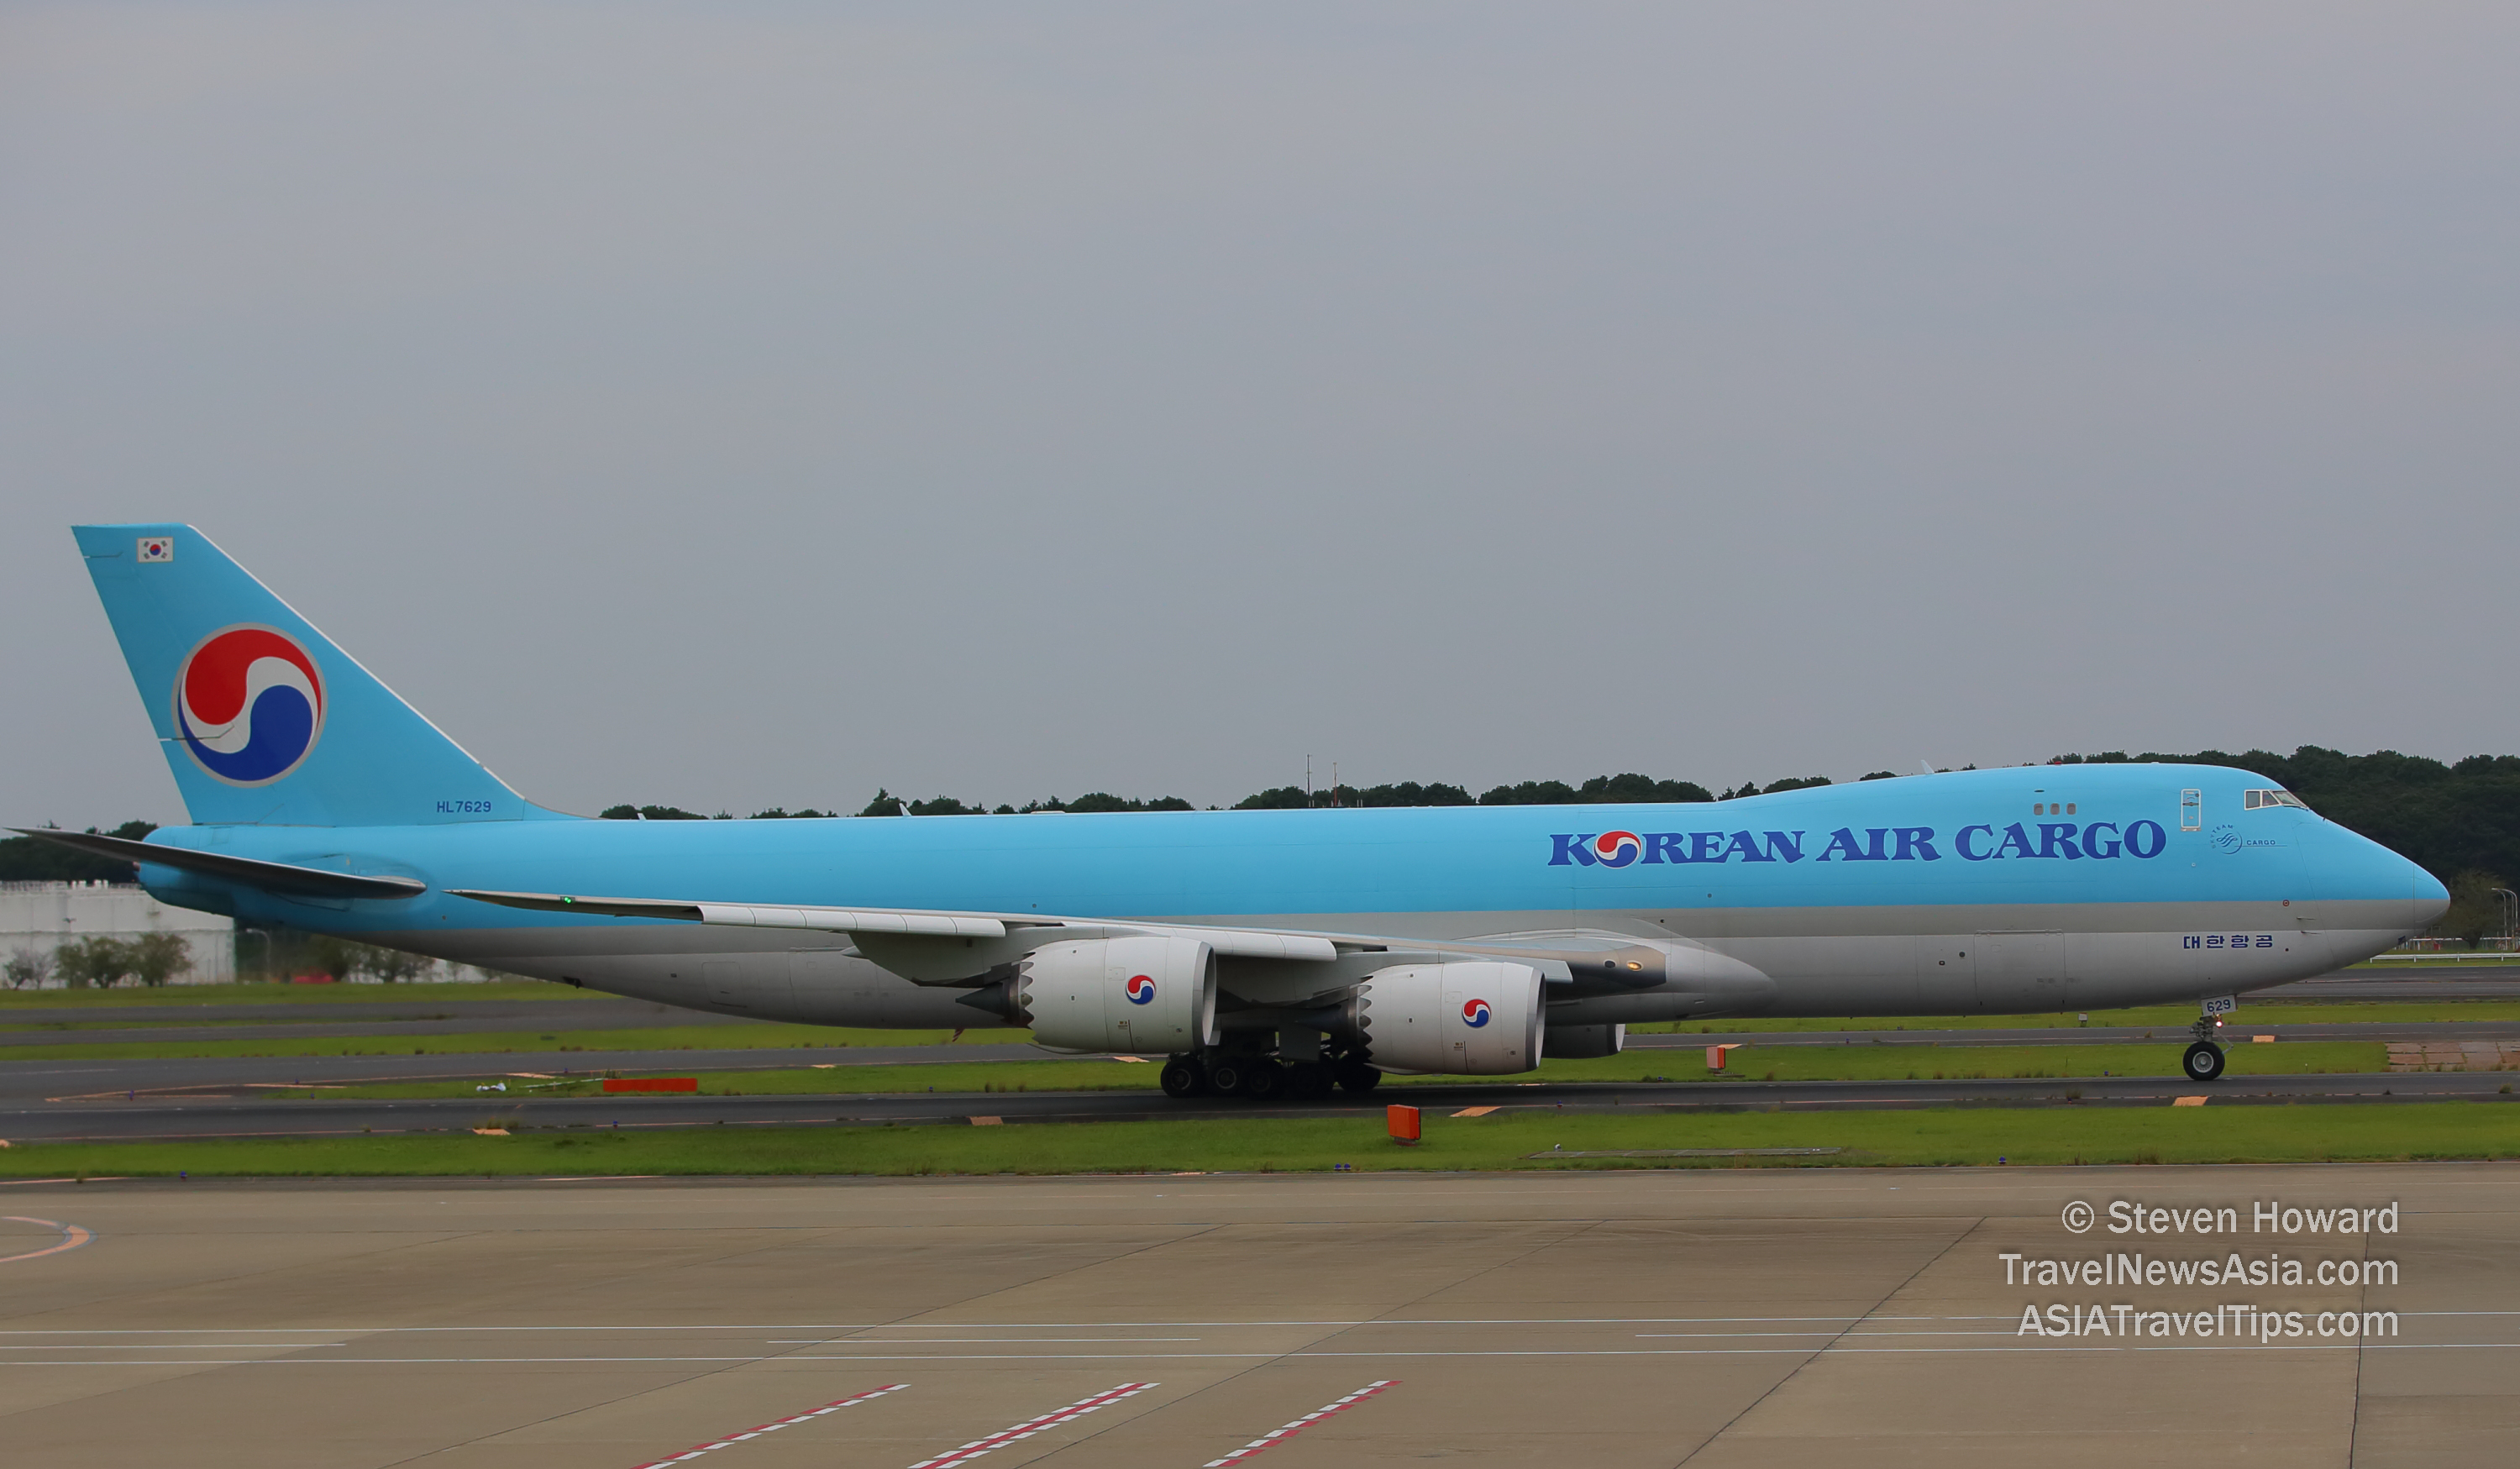 Korean Air Cargo Boeing 7478F reg: HL7629. Picture by Steven Howard of TravelNewsAsia.com Click to enlarge.